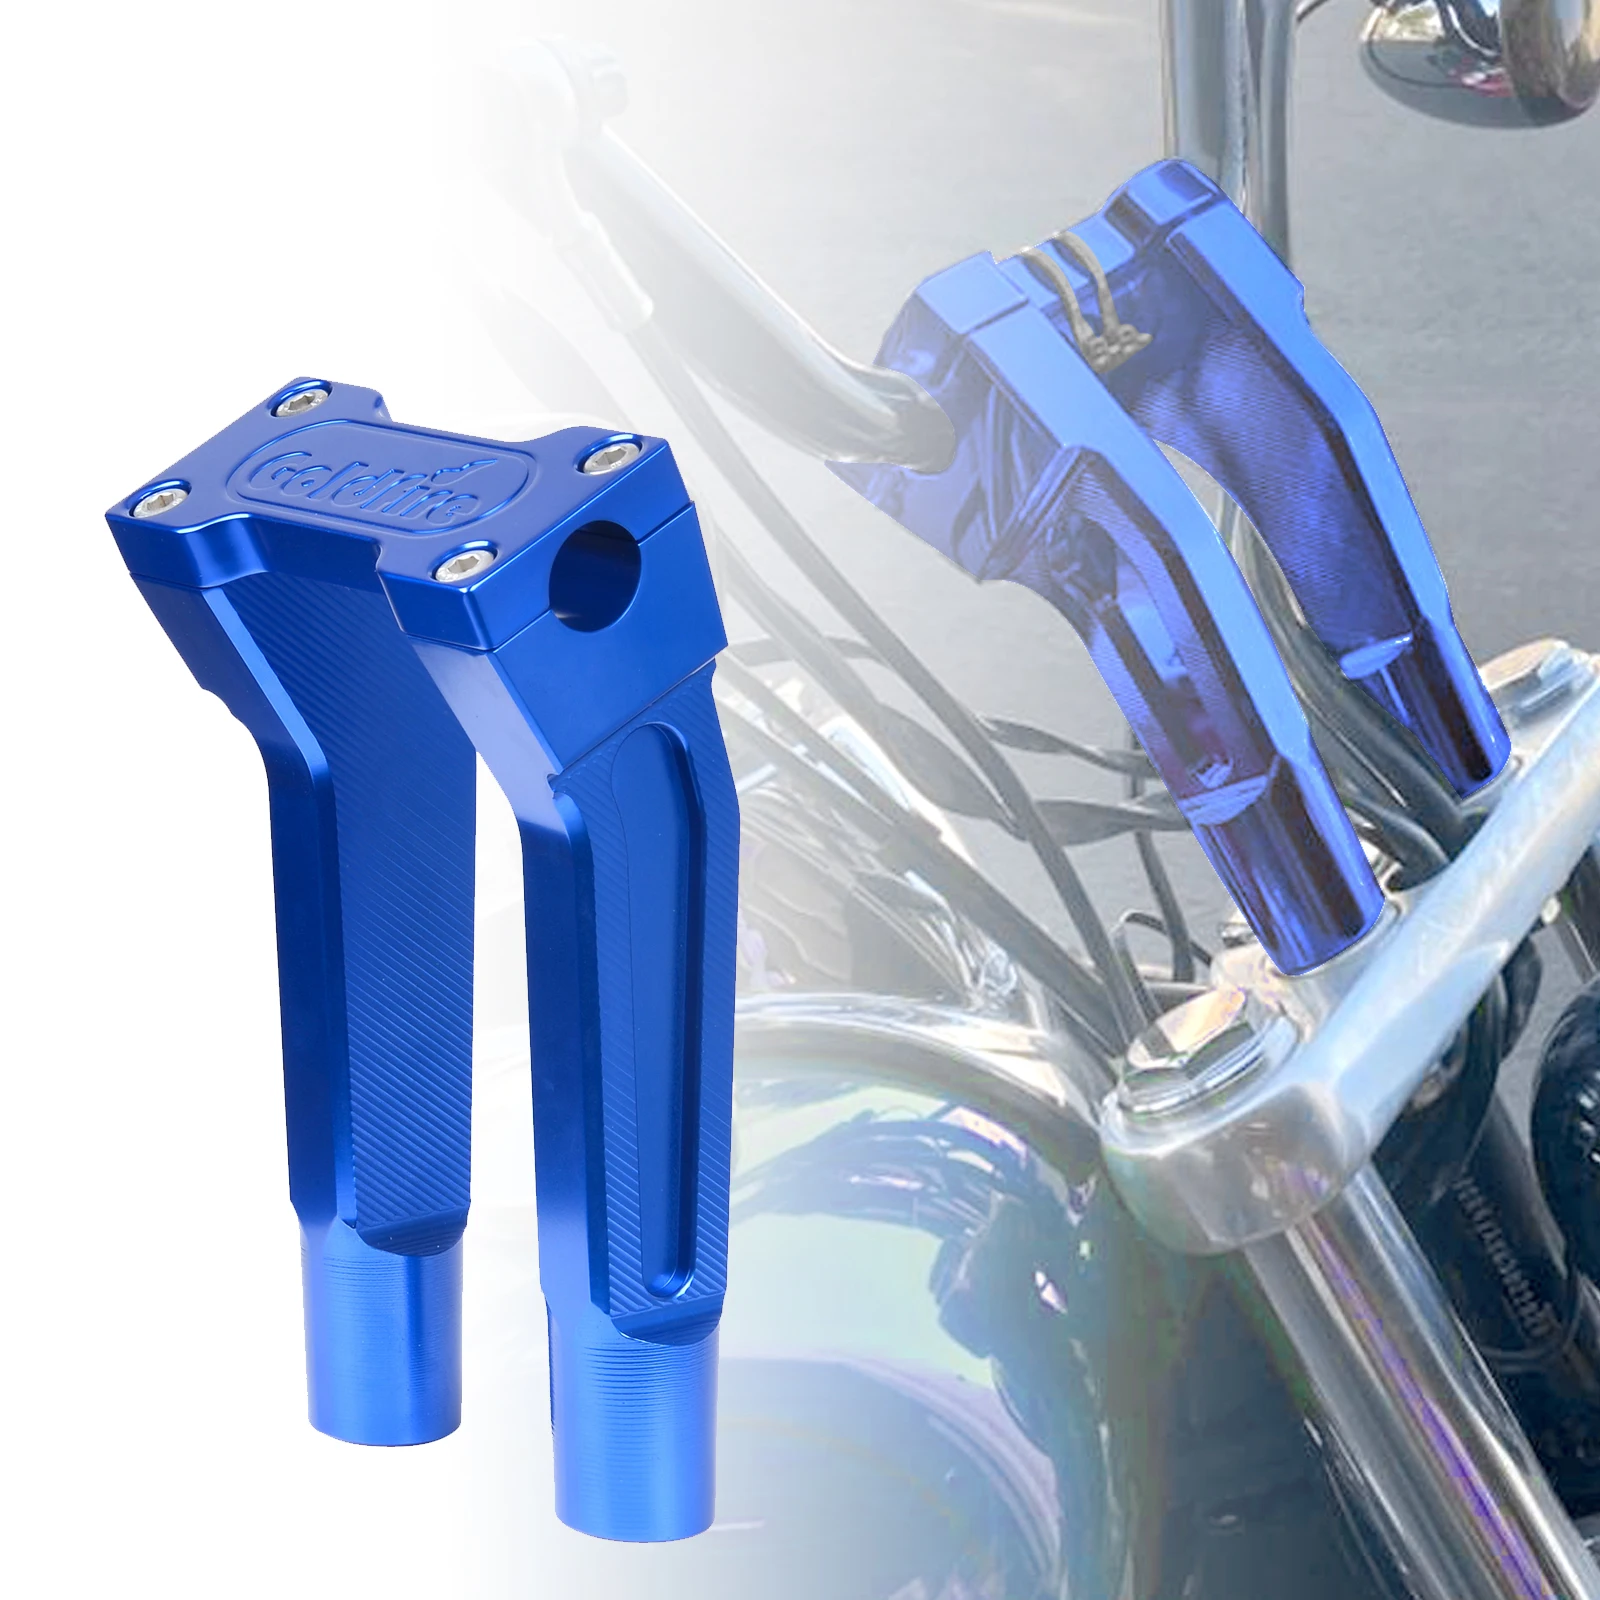 

6"8"10" Motorcycle Bar Clamps Raised Handlebar Handle Bar Risers Moto Parts For Most Dyna / Street Bob / Softail / Sportster